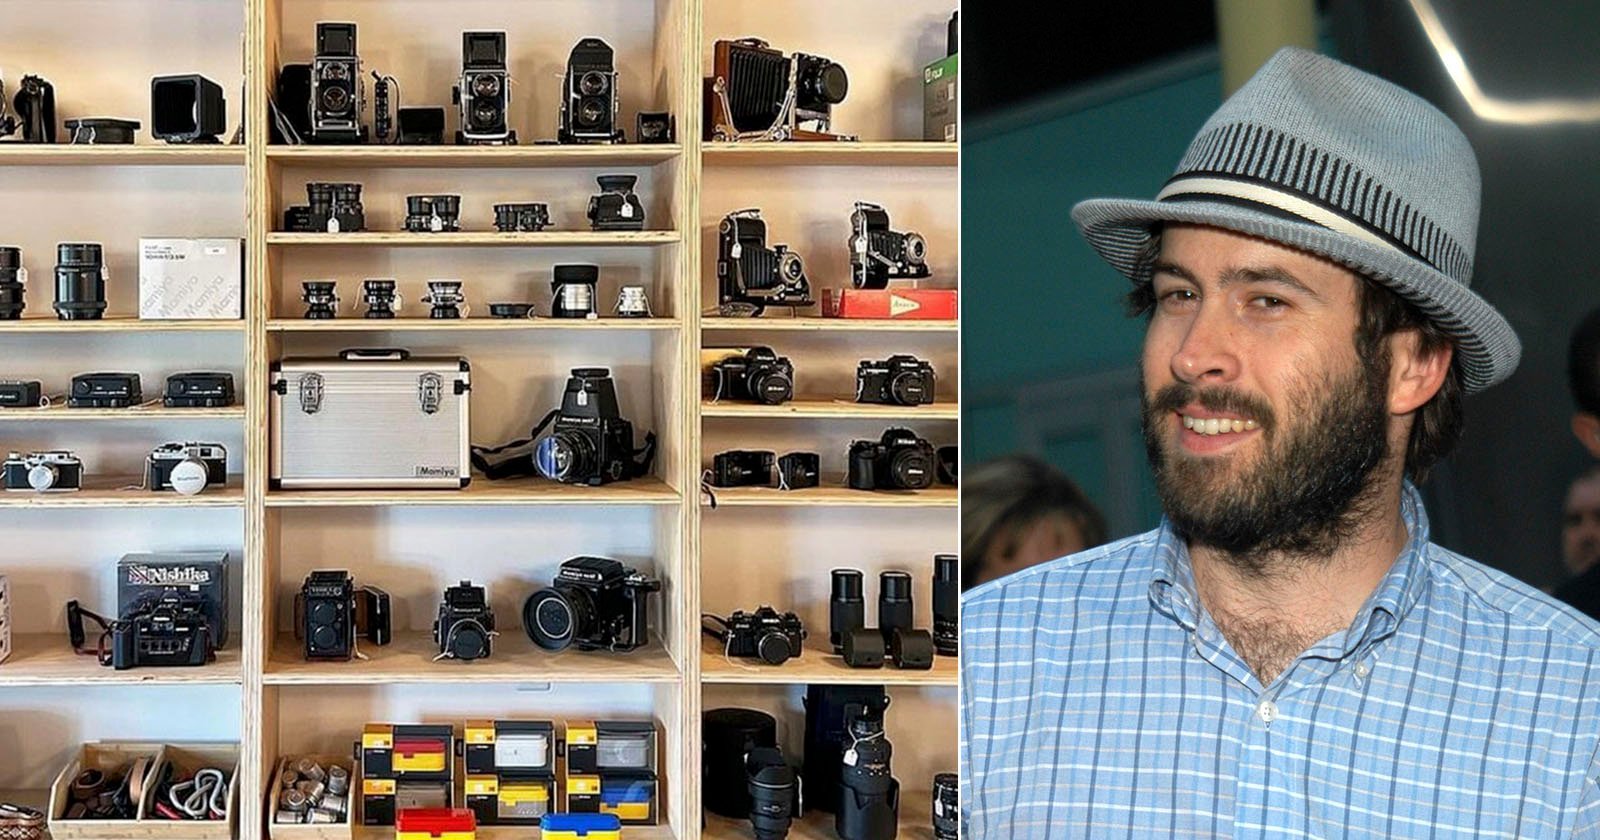  jason lee from earl opened camera store 